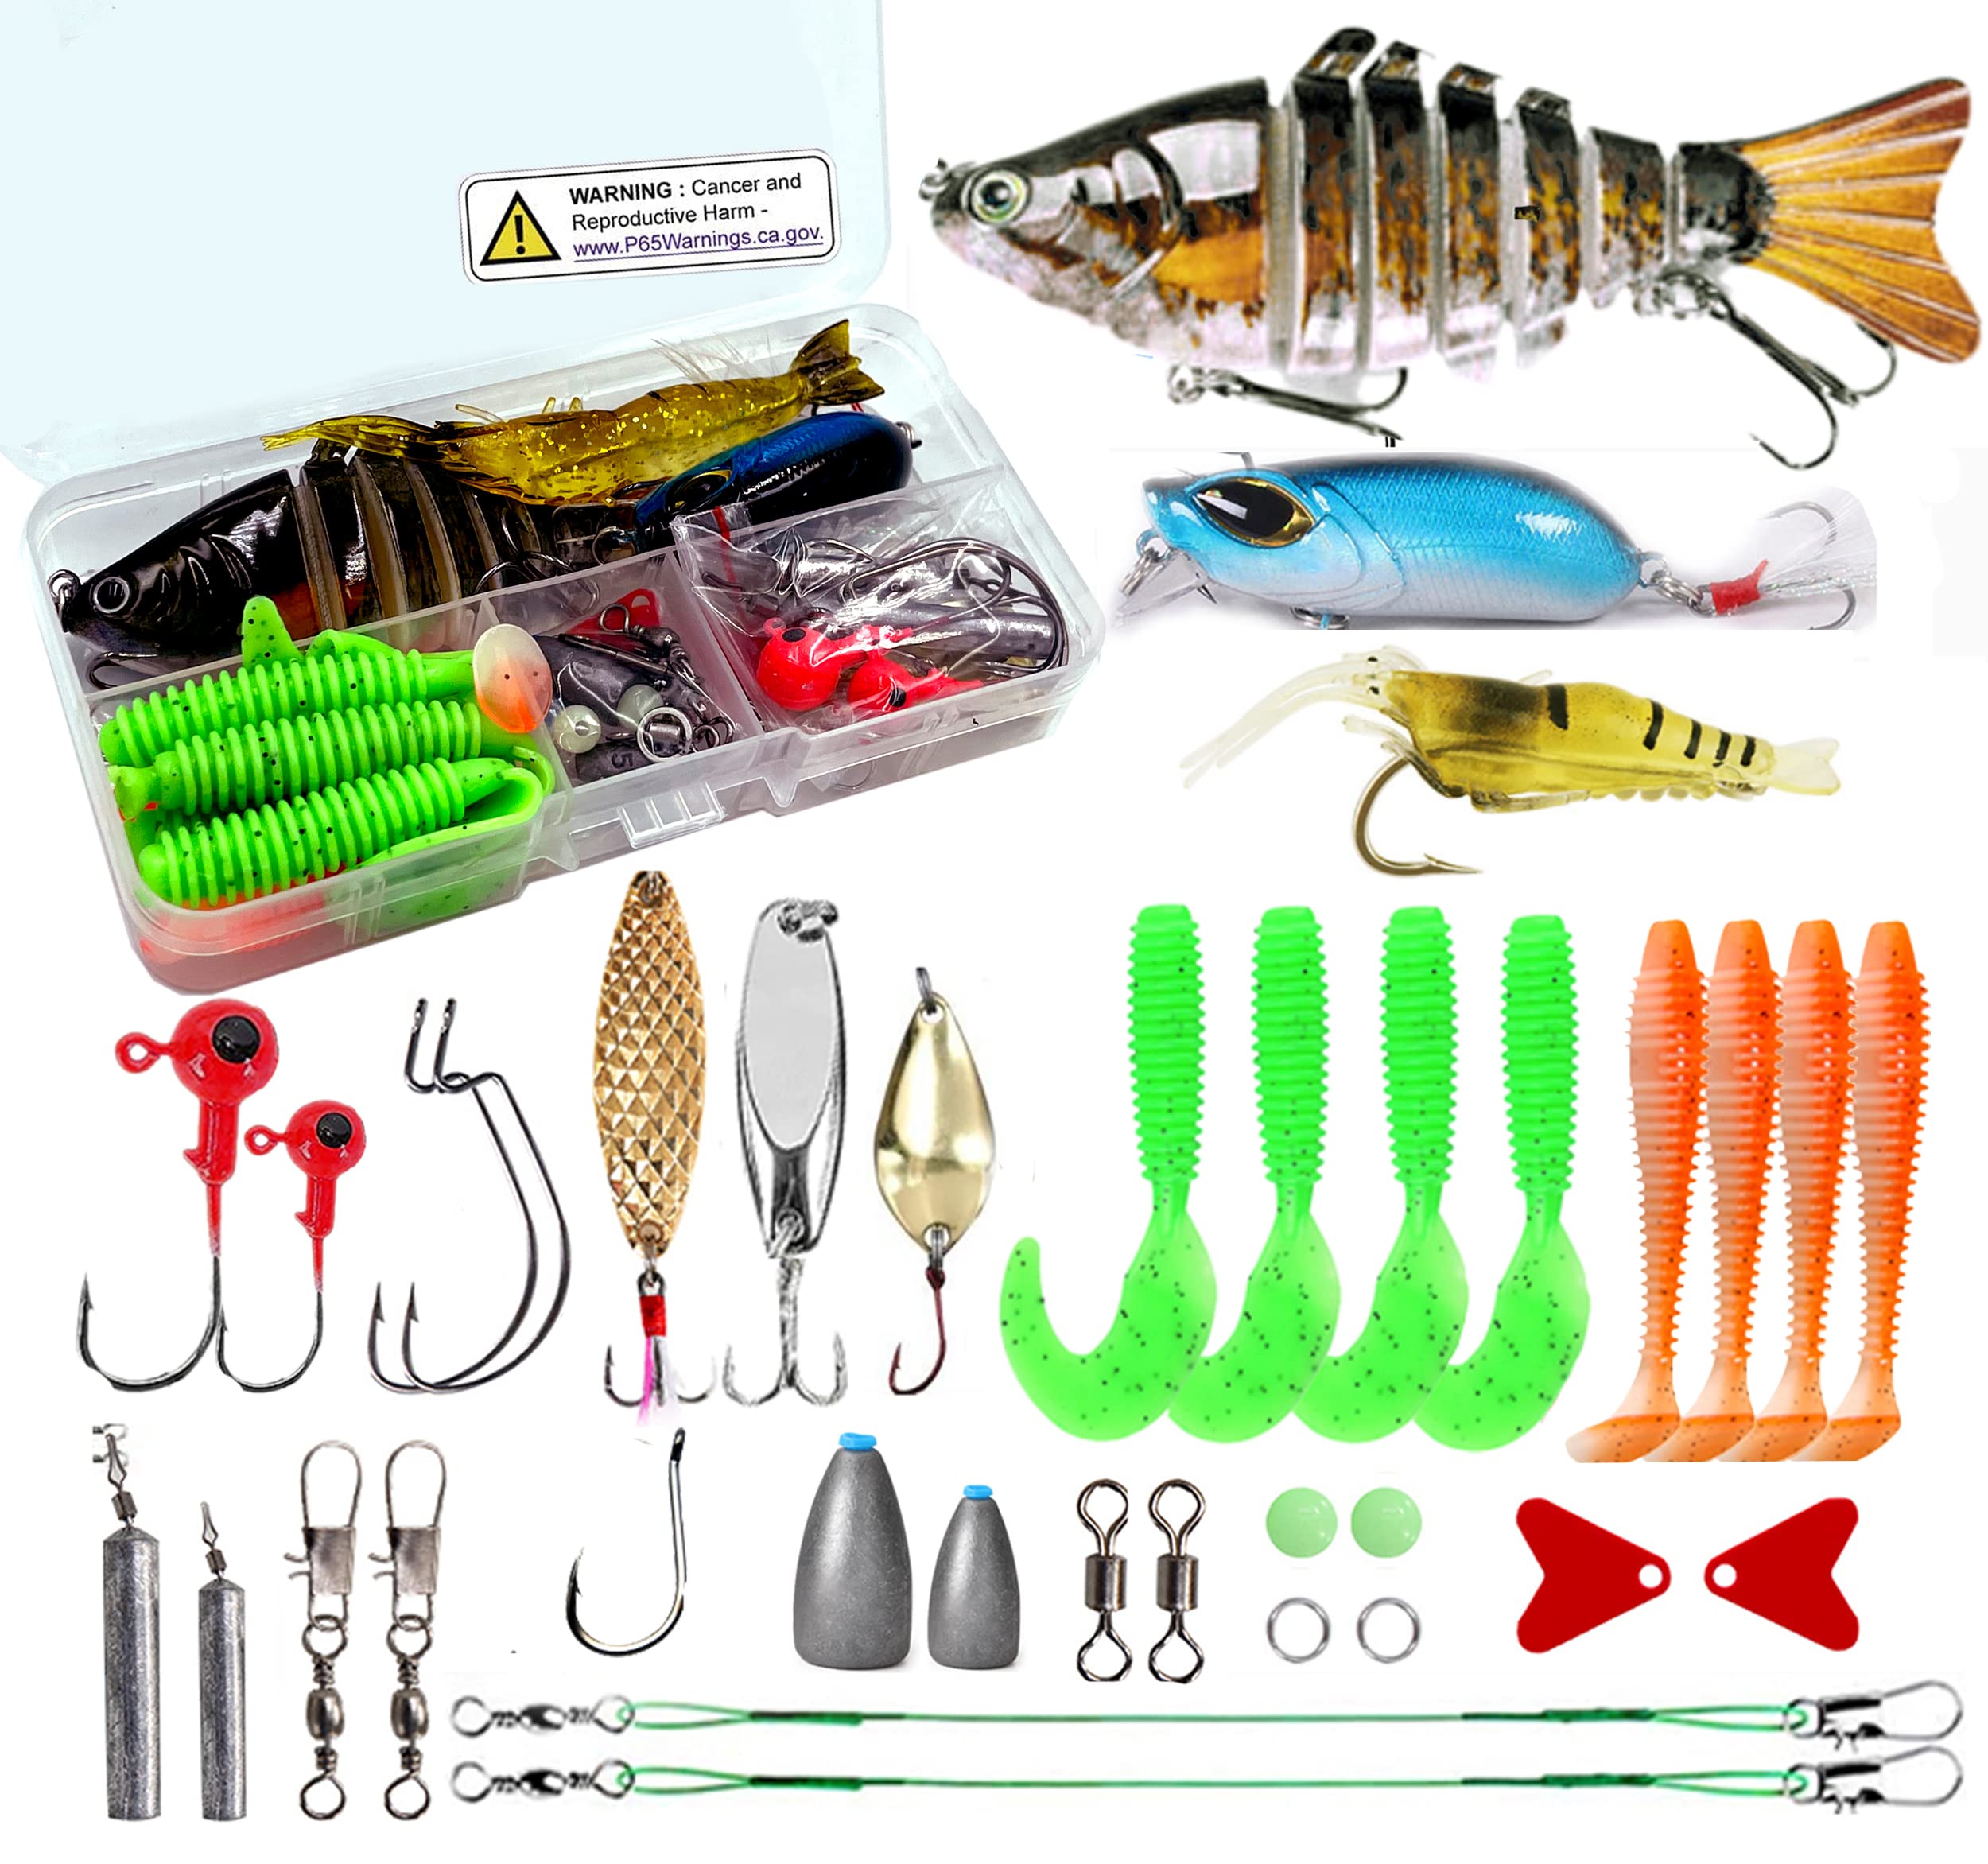  Fishing Lures Kit for Freshwater Saltwater, Bait Tackle Kit  for Bass Trout Salmon,Including Crankbaits, Spinnerbaits, Topwater Lures, Tackle  Box and Fishing Gear Lures Kit Set : Sports & Outdoors